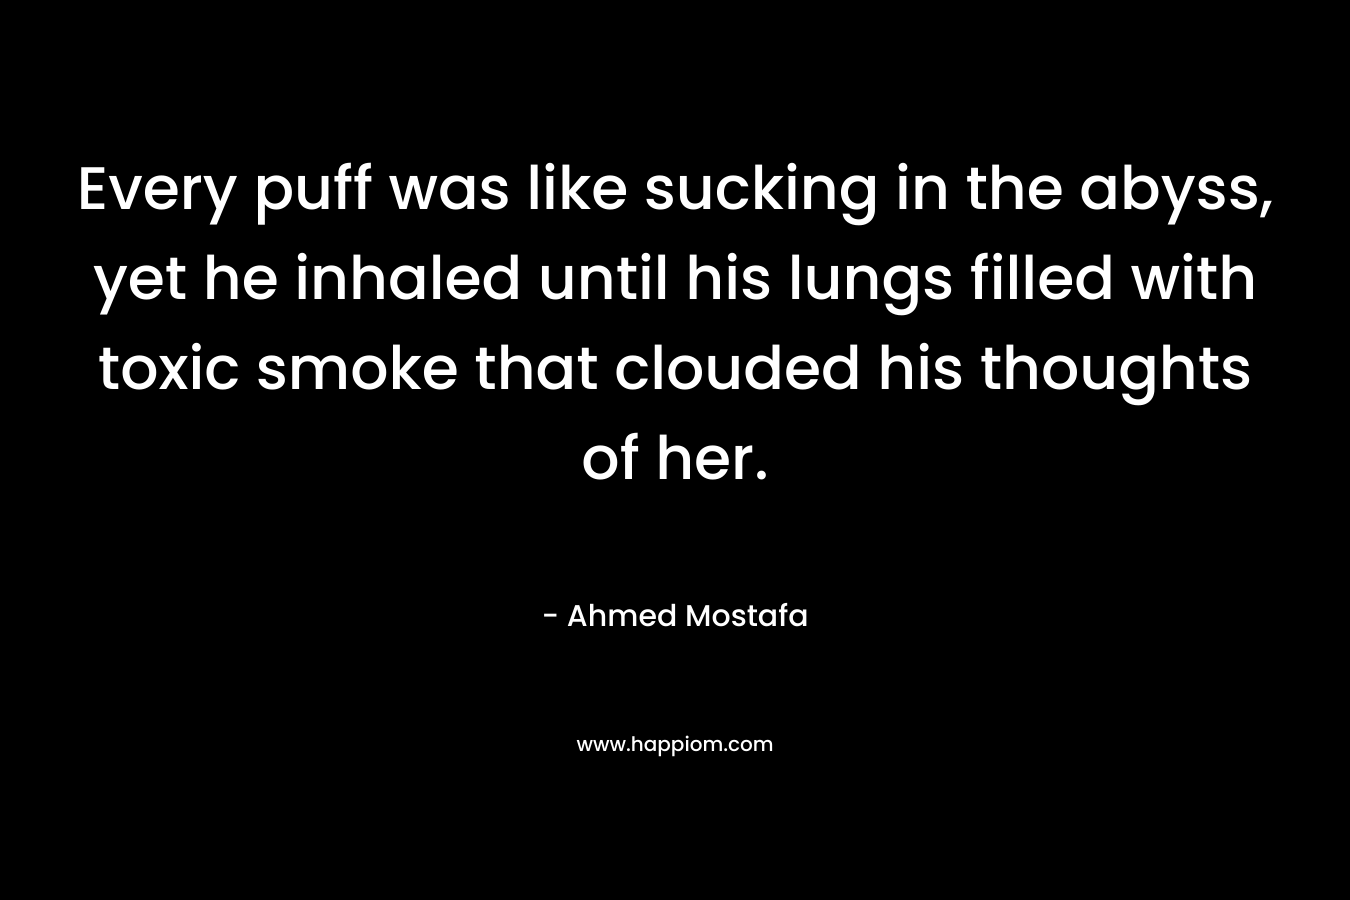 Every puff was like sucking in the abyss, yet he inhaled until his lungs filled with toxic smoke that clouded his thoughts of her.